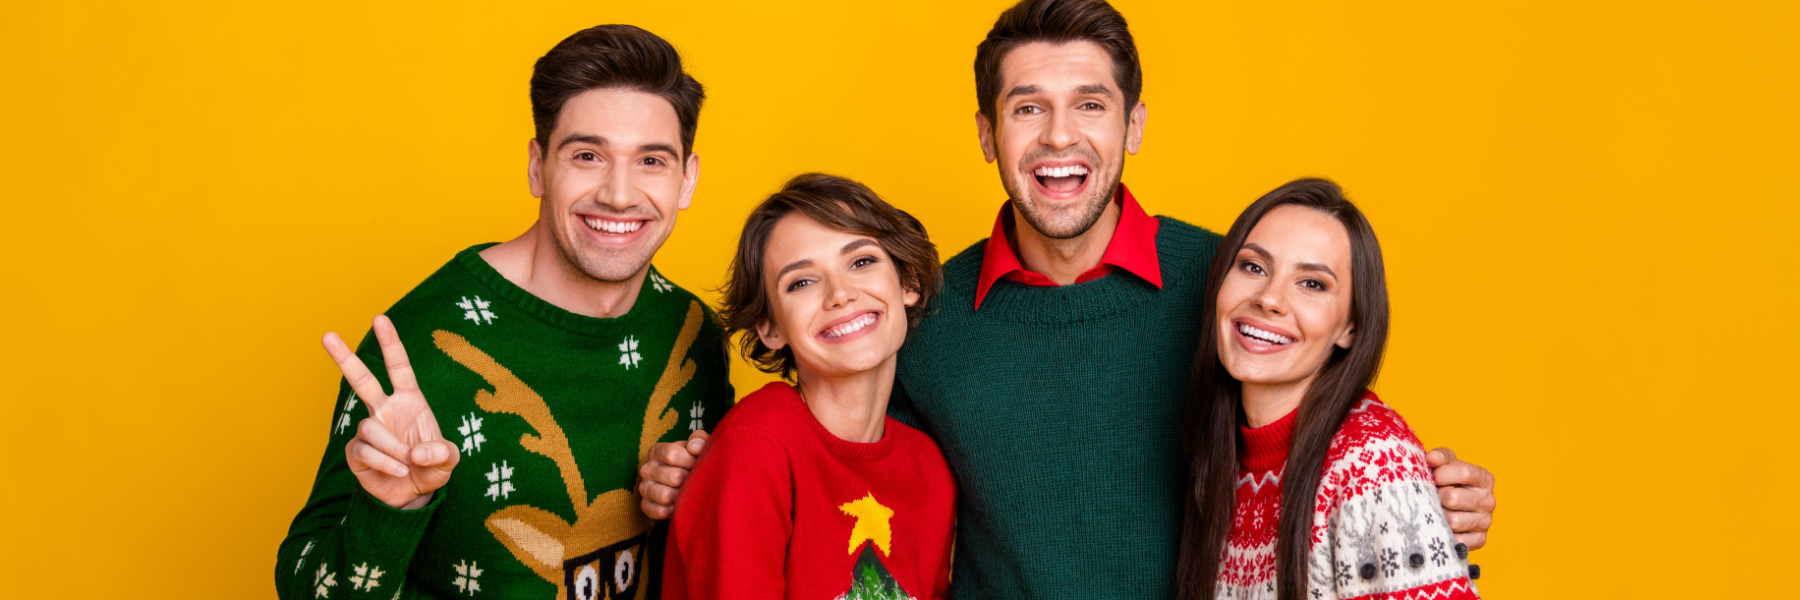 Group Ugly Holiday Sweaters Yellow Background 1800X600